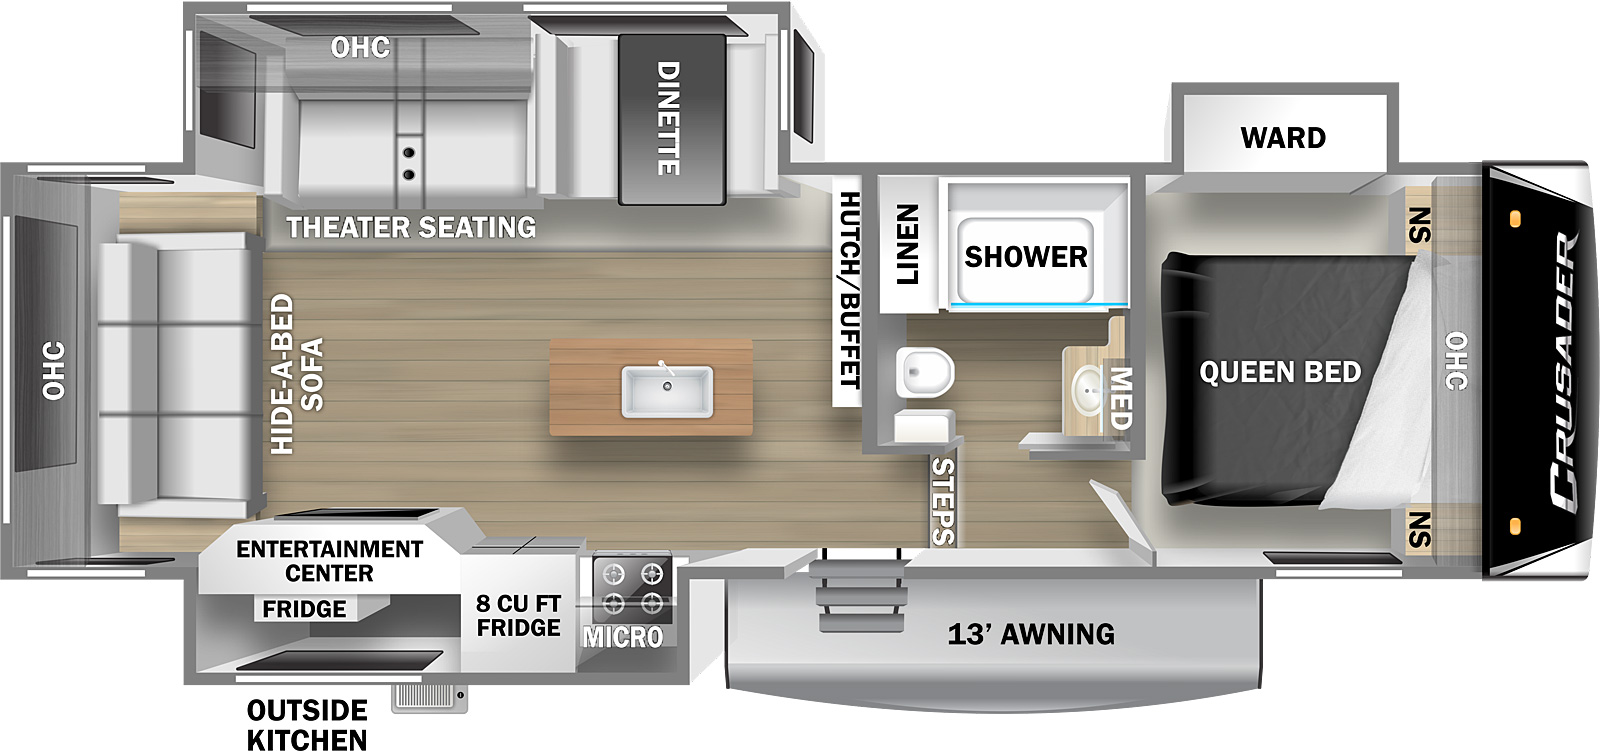 The Crusader Lite 29RS has one entry door, a 13' awning, and three slideouts, two on the off-door side and one on the door side. The front of the unit is a bedroom with a queen bed that has nightstands and room to stand on either side of the bed. There are cabinets mounted over the head of the bed and there is a wardrobe slideout. Exiting the bedroom door is a hallway that goes down two steps into the main living area. On the right of the hallway is a bathroom with shower, sink and medicine cabinet, linen closet, and commode. Standing at the base of the stairs, you have a hutch and buffet on your right. A butcher block kitchen island with sink is located near the center of the room. On the right is a slide room with a booth dinette, theater seating, and overhead cabinets. The left wall is another slide room containing a stovetop and oven and 8 cubic foot refrigerator, with cabinets and a microwave mounted overhead. There is an entertainment center next to the refrigerator that faces the theater seating on the opposite wall. The rear wall of the unit is taken up by a hide-a-bed sofa with overhead cabinets mounted above.